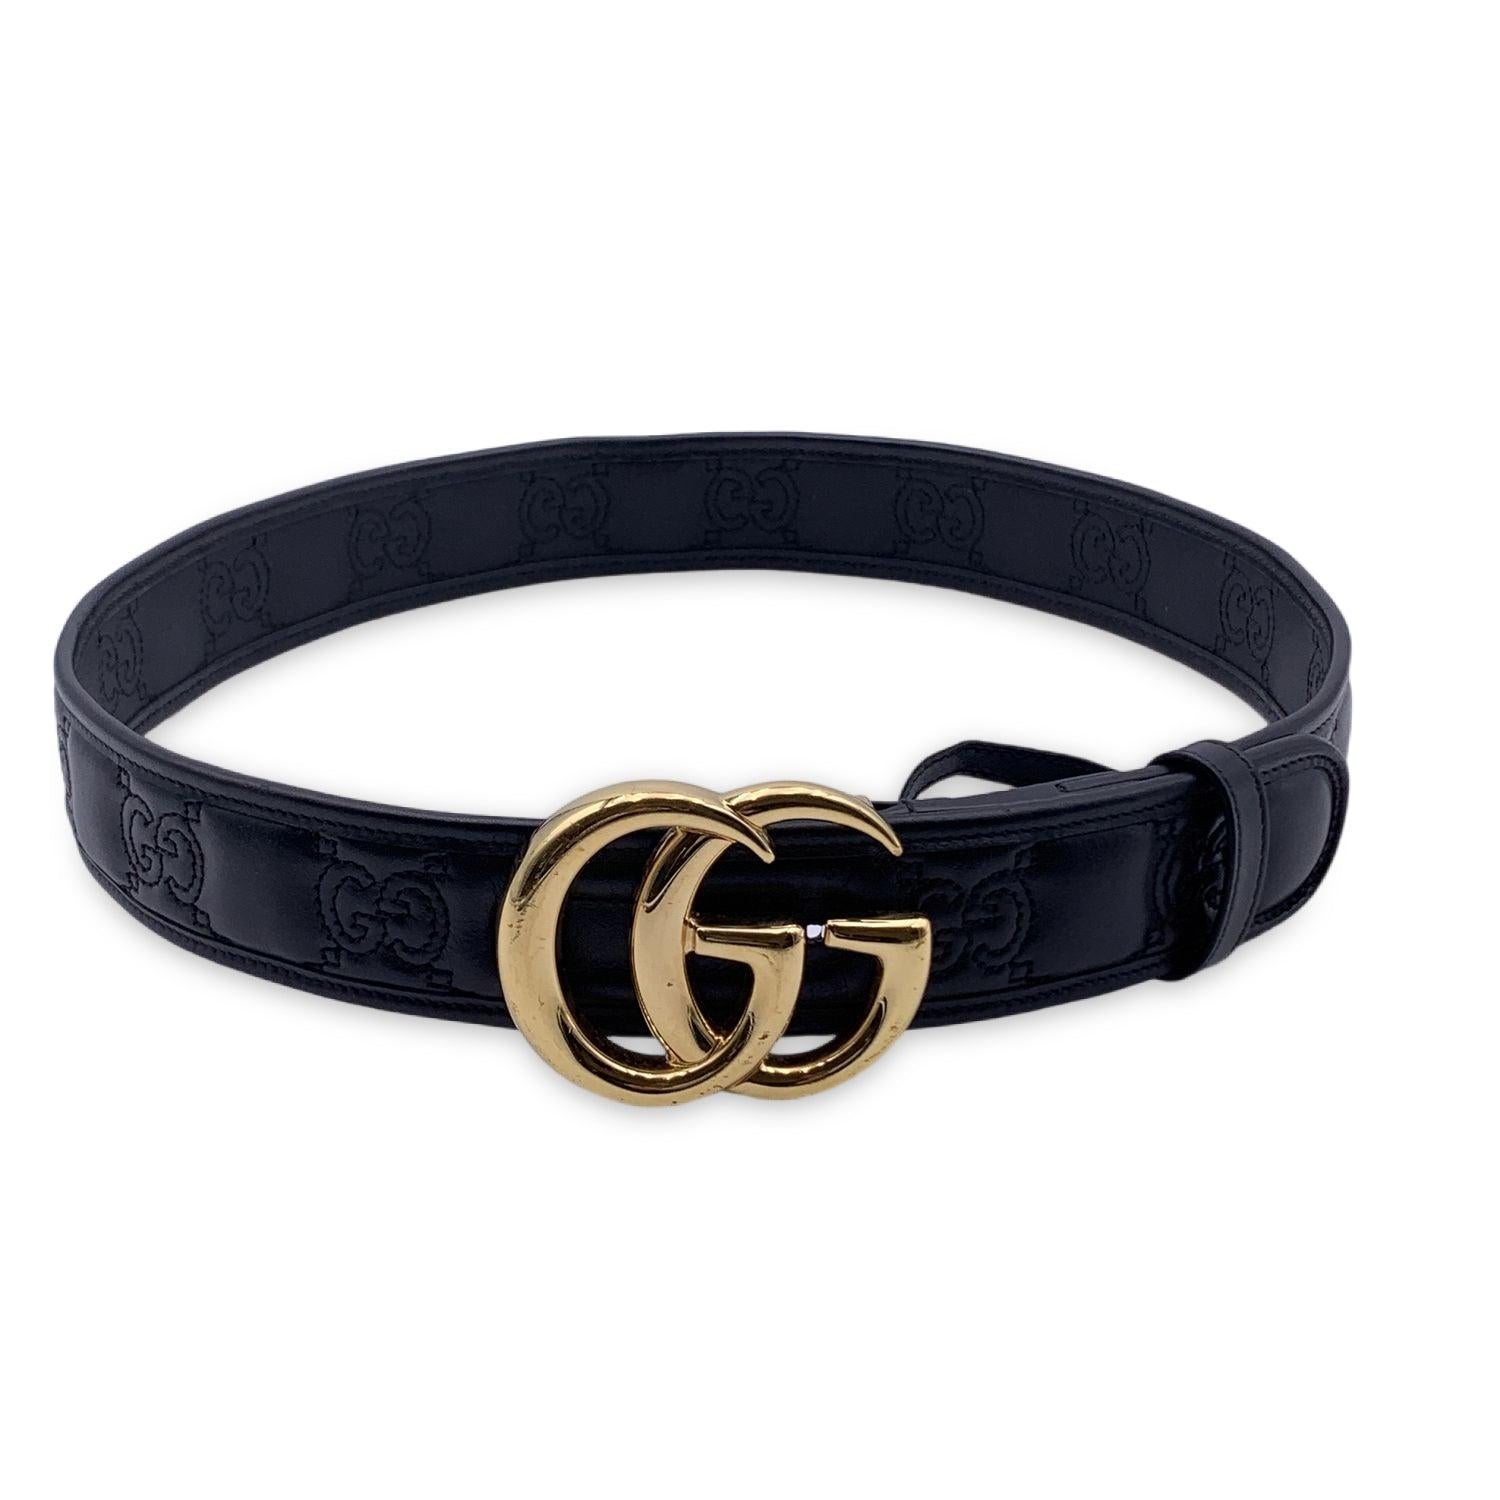 This beautiful Belt will come with a Certificate of Authenticity provided by Entrupy. The certificate will be provided at no further cost

Gucci Marmont belt in black quilted leather with GG logo pattern. Gold metal GG buckle (2.25 inches - 5.7 cm